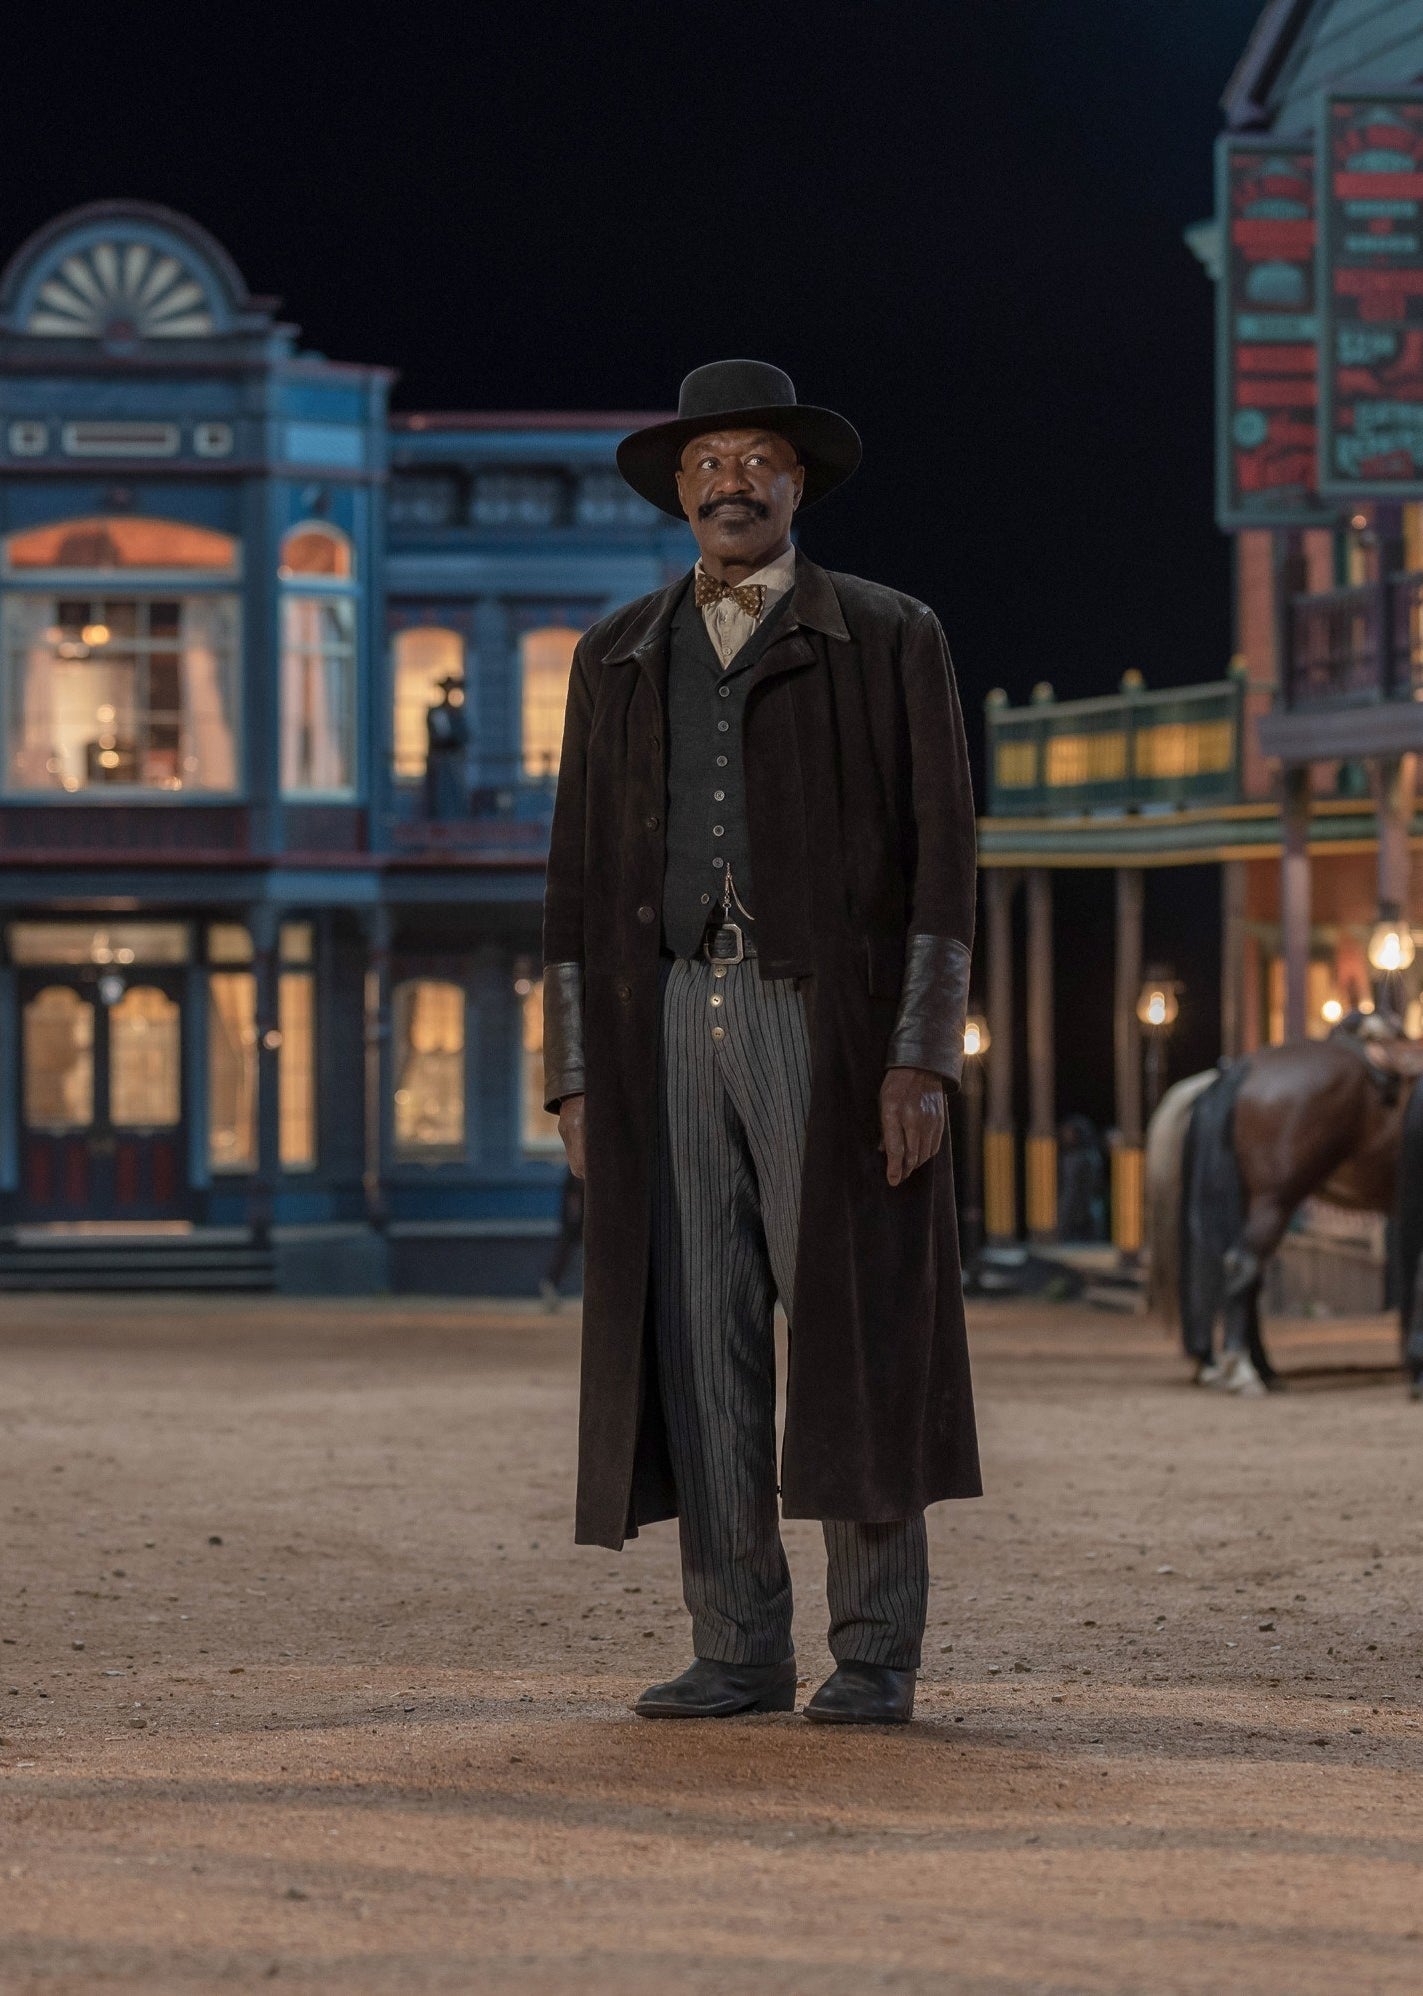 Delroy Lindo as Bass Reeves stands in a townsquare